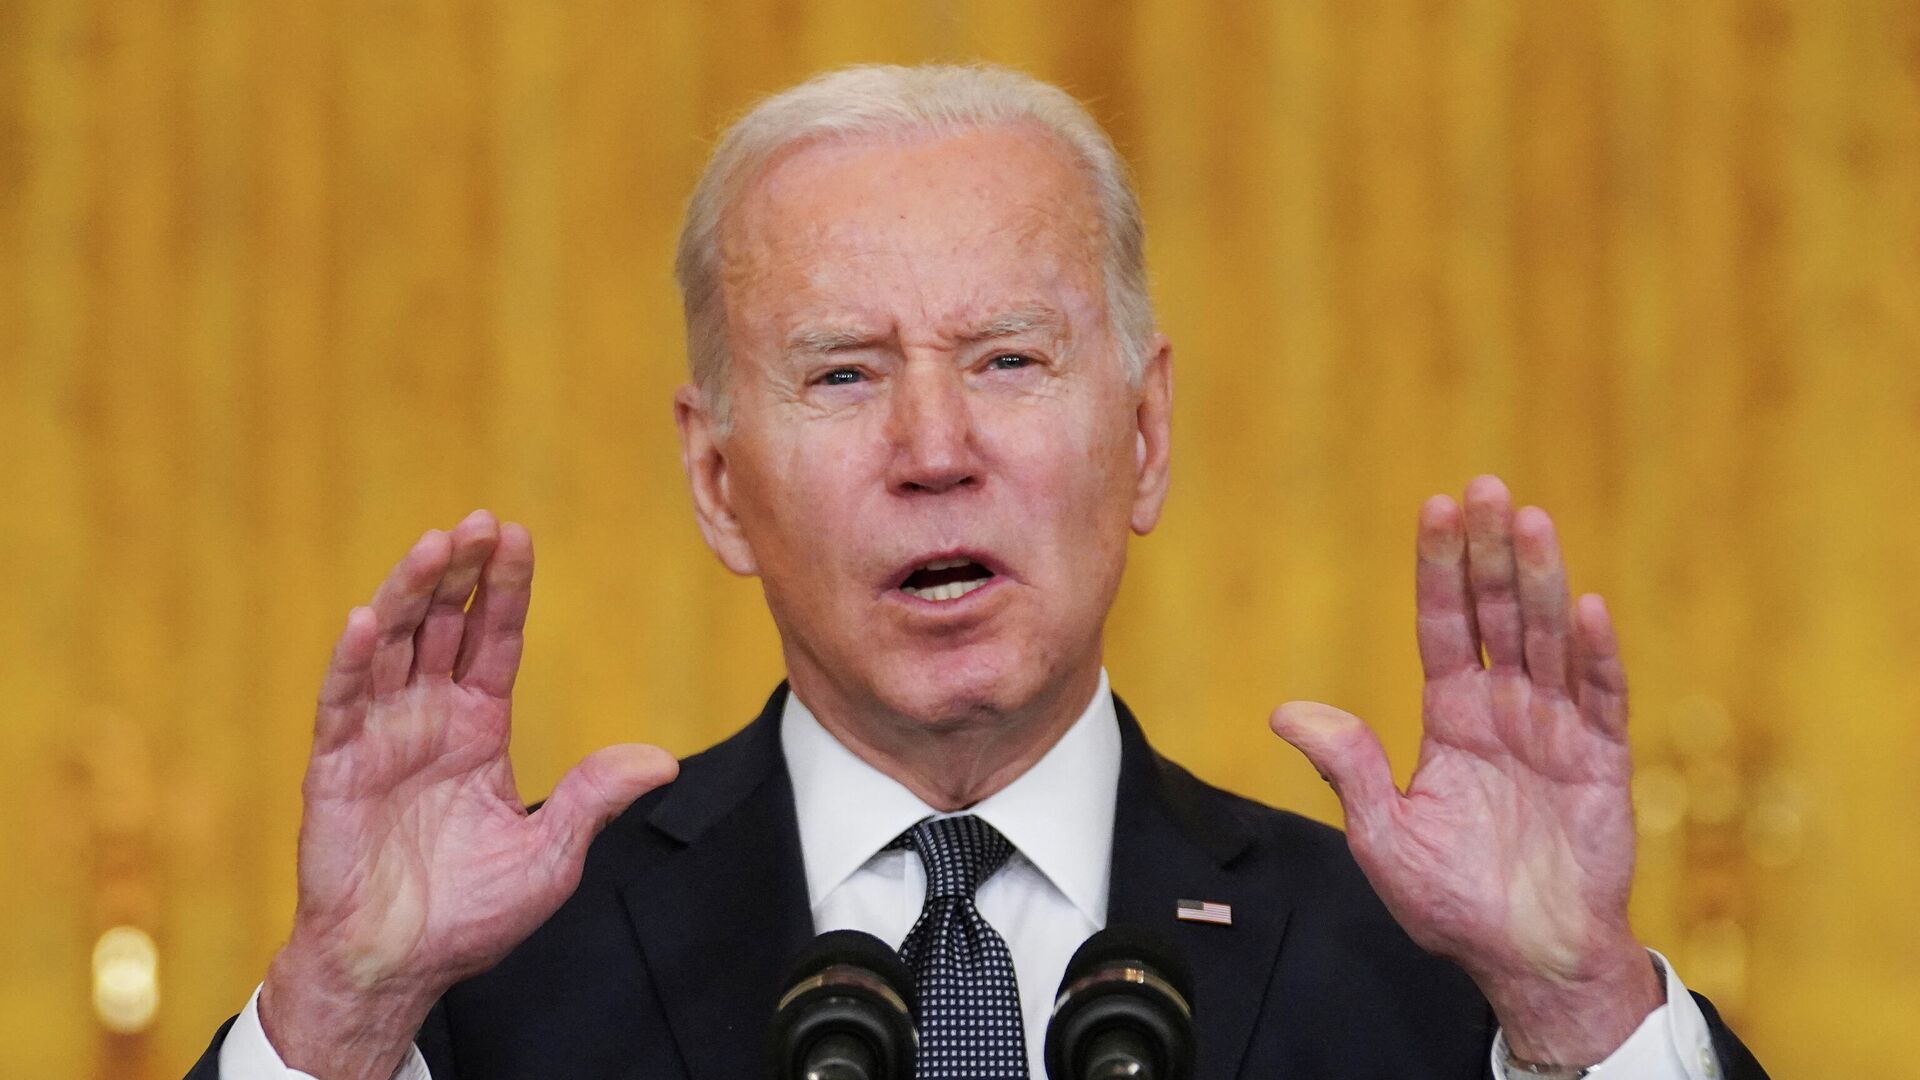 U.S. President Joe Biden gestures as he speaks about the situation in Russia and Ukraine from the White House in Washington, U.S., February 15, 2022. - Sputnik International, 1920, 15.02.2022